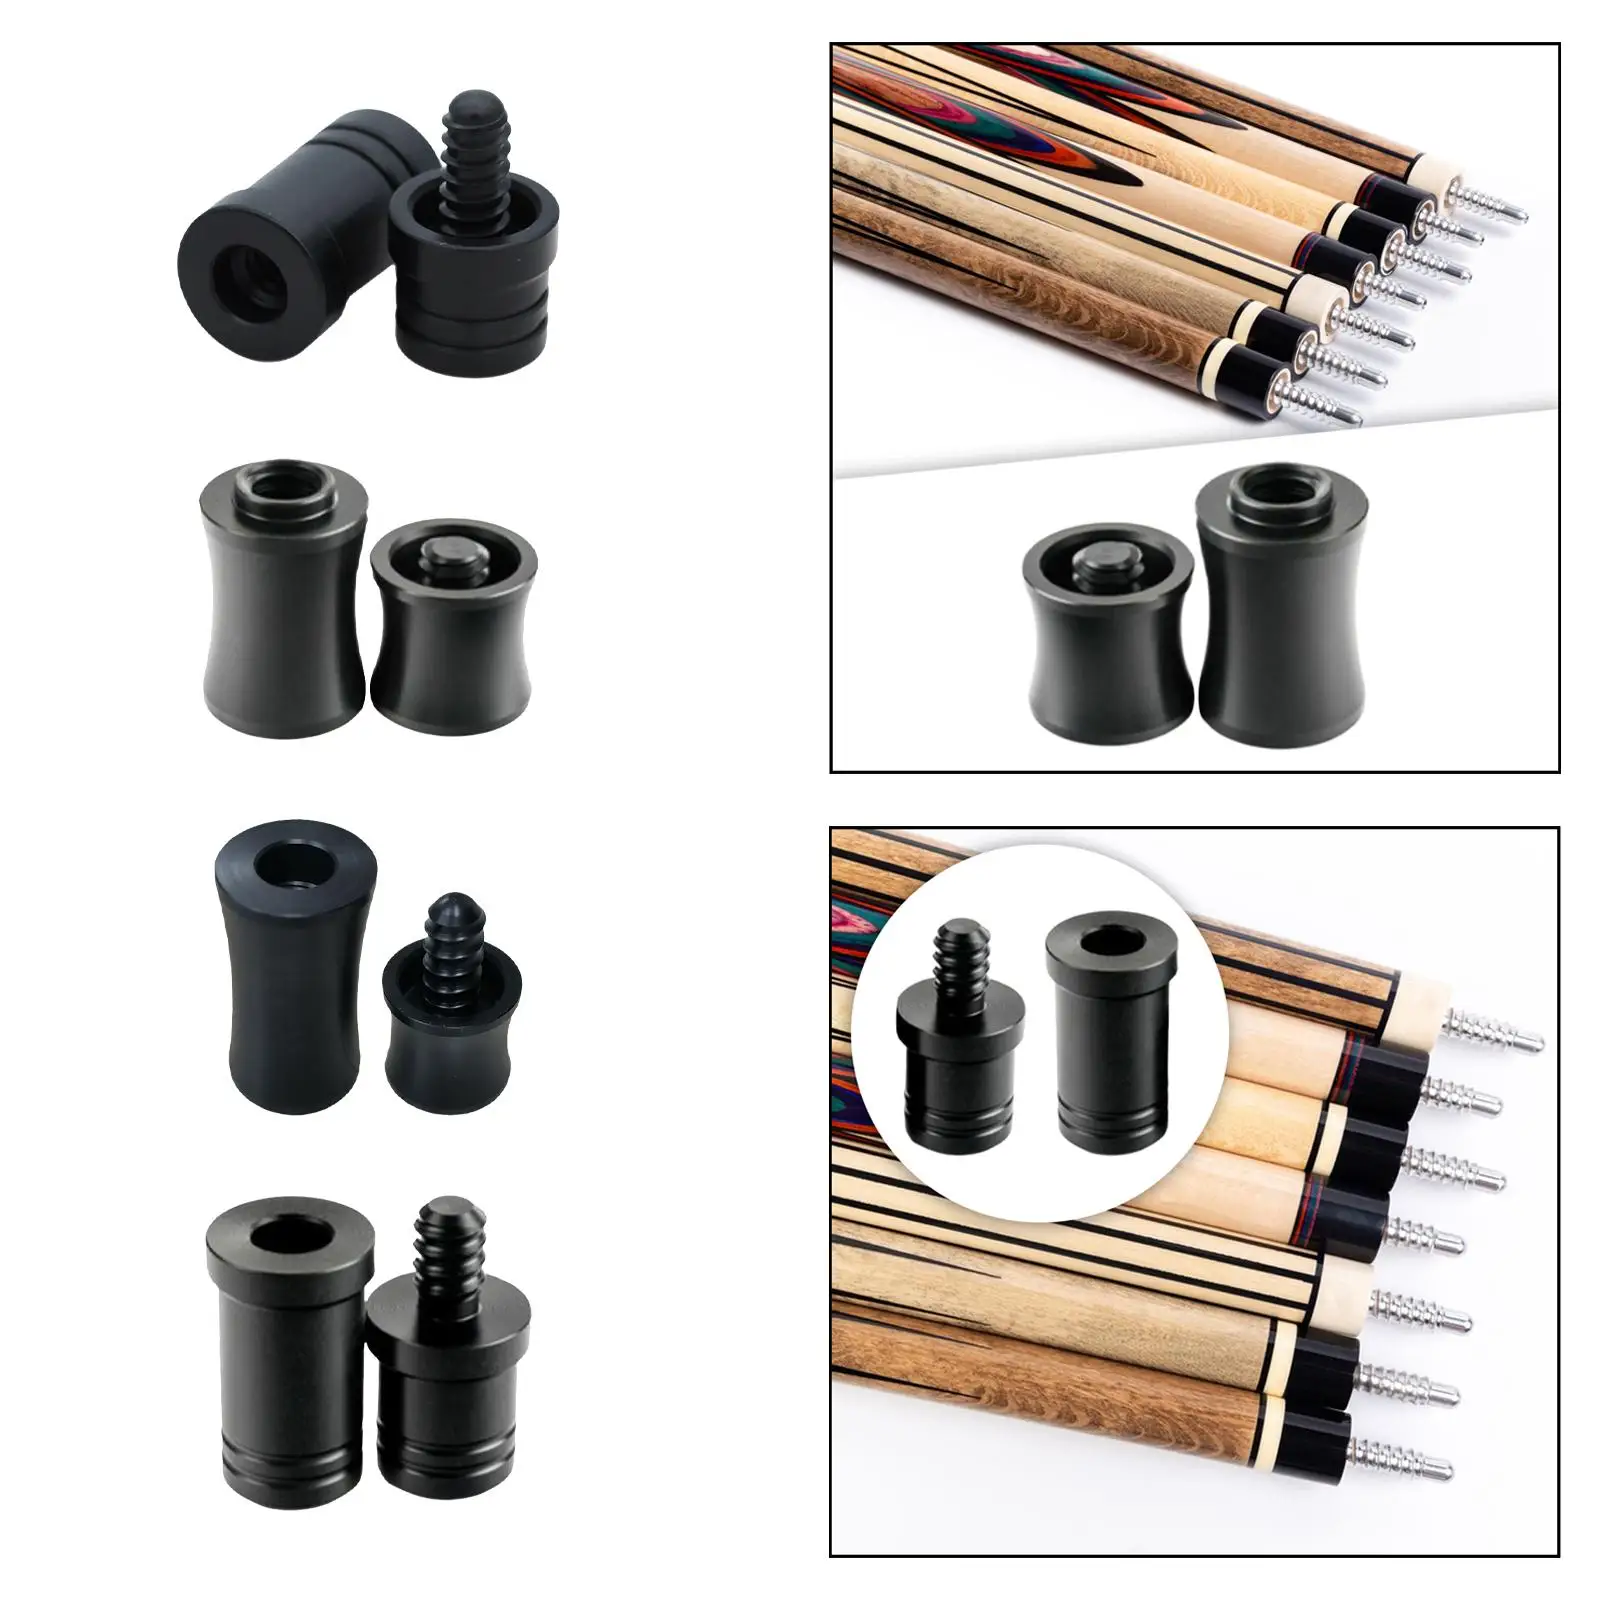 Billiard Cue Joint Protector Protect Thread Joint Billiard Cue Joint Cap Protect